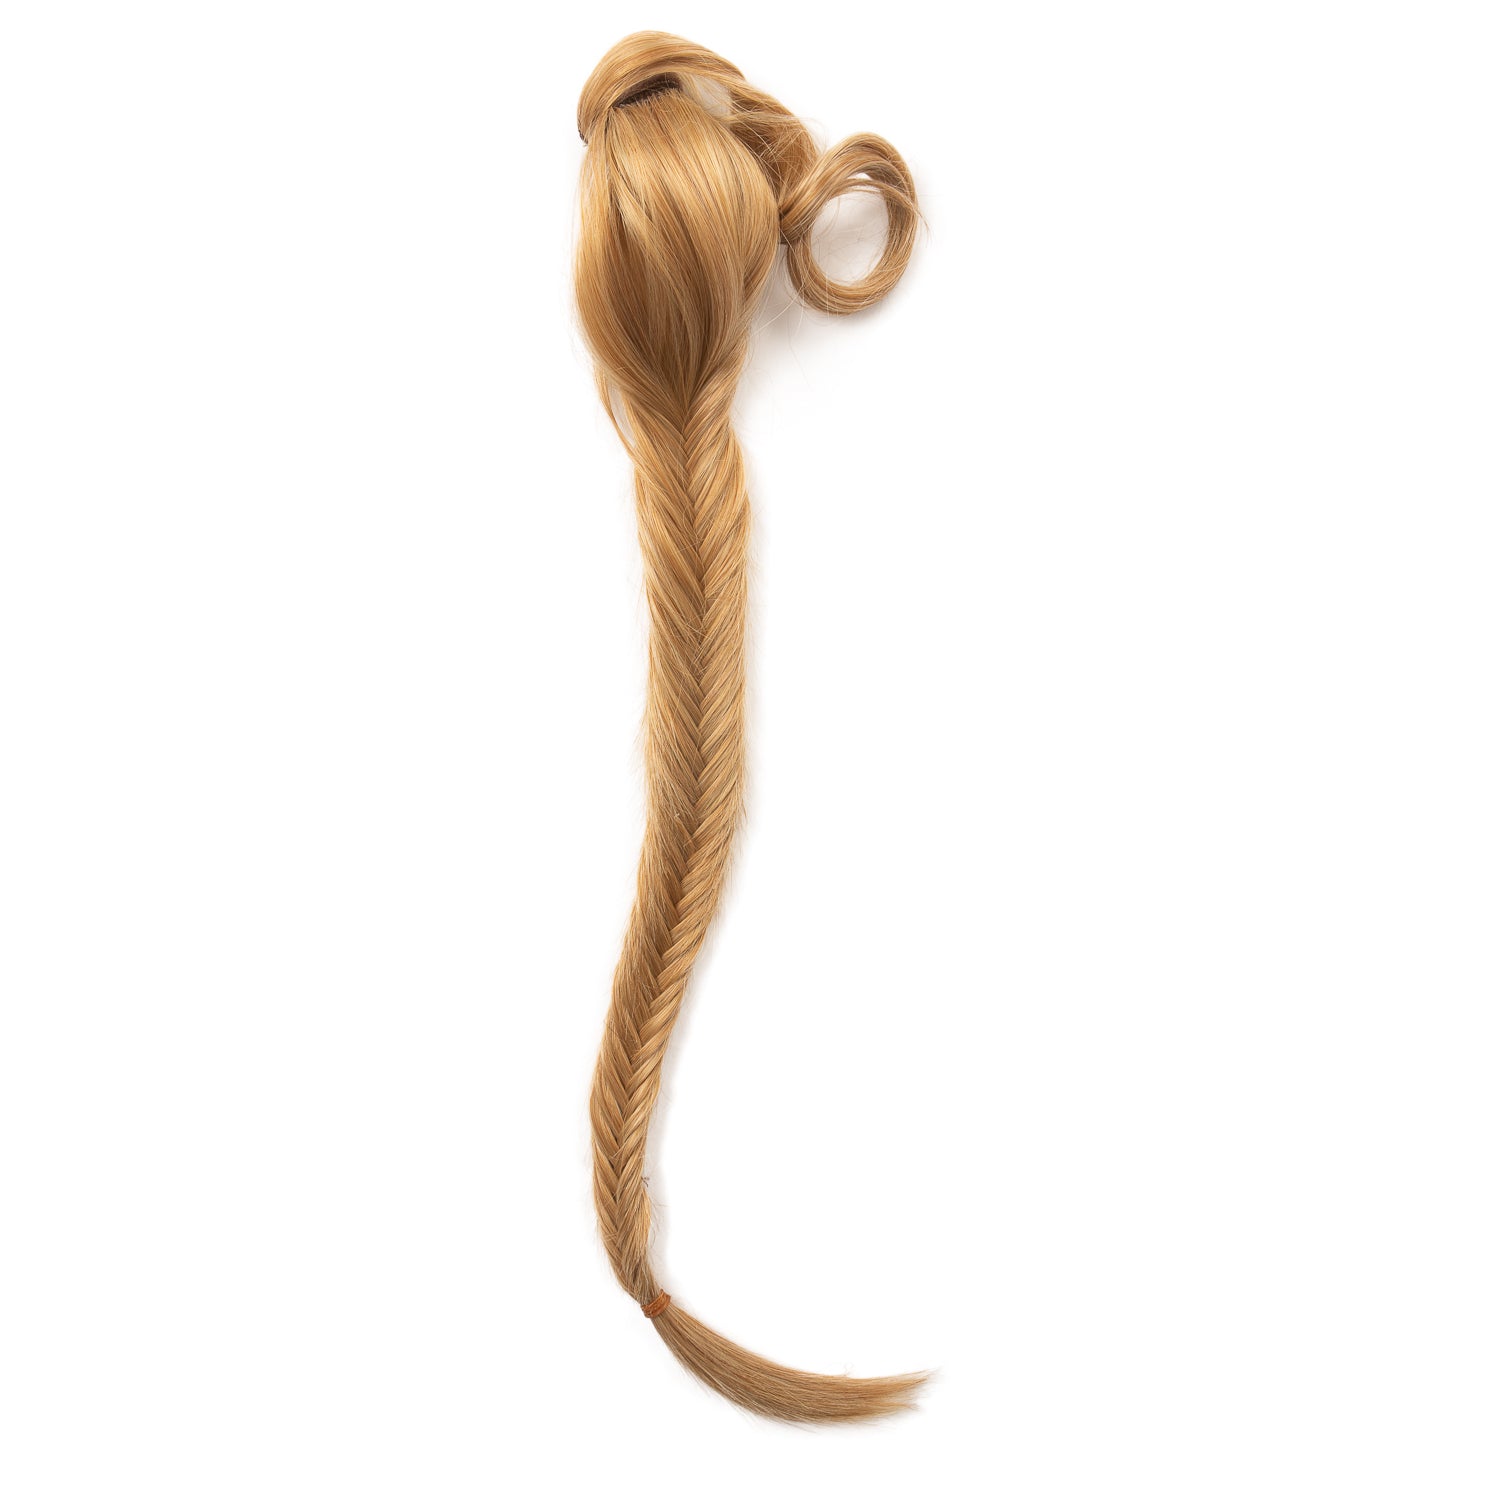 Clip In 24" Fishtail Braid Hair Extension - Biscuit (379466136)